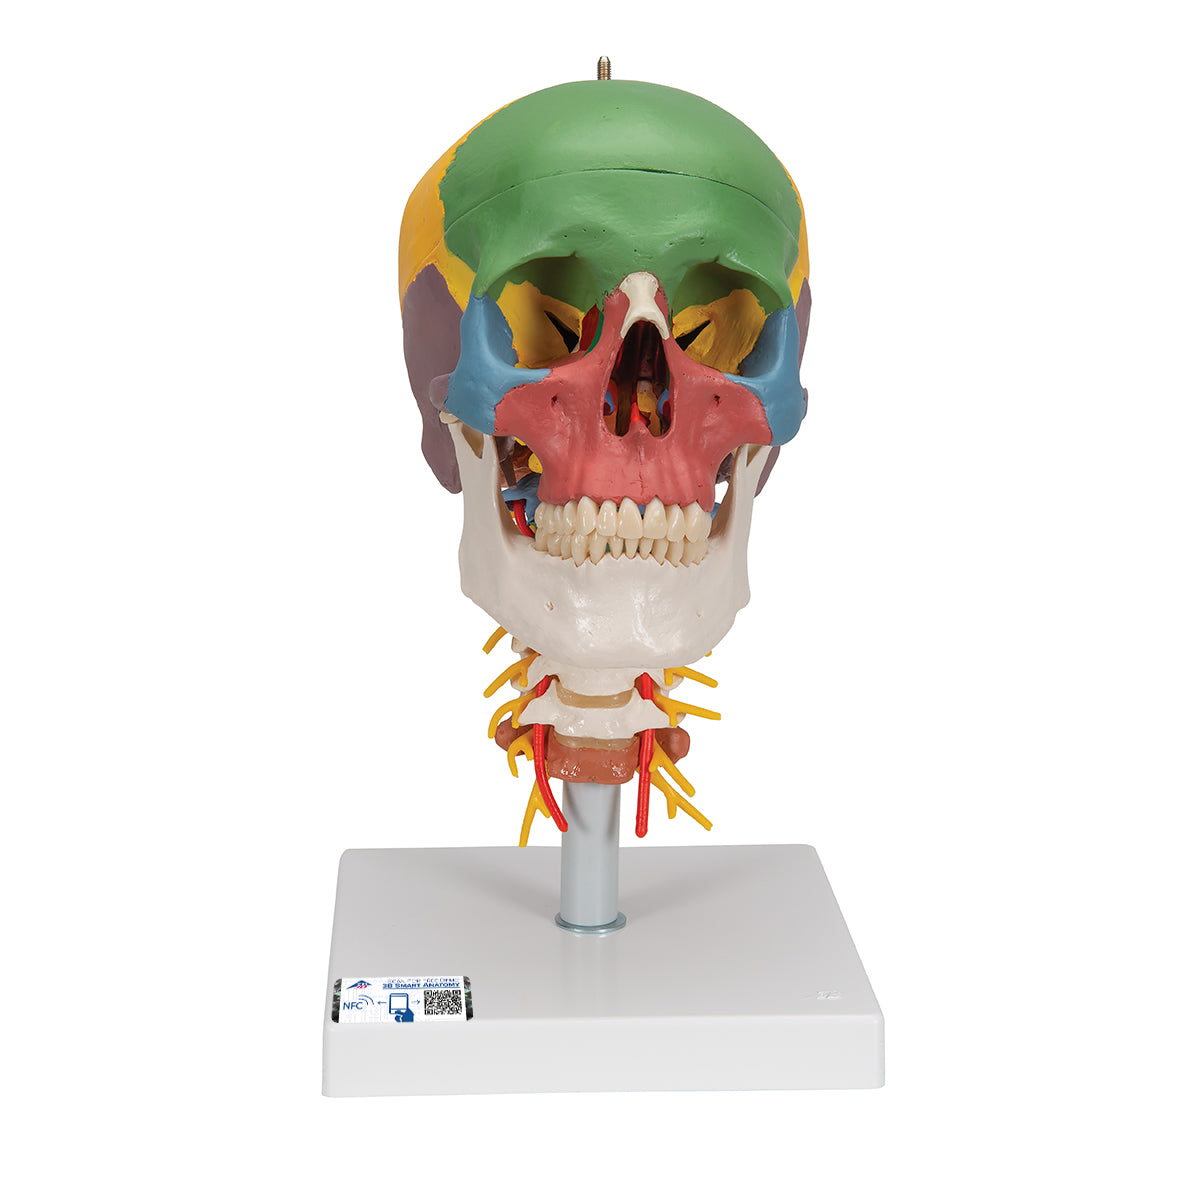 Skull model with colors, cervical vertebrae and more